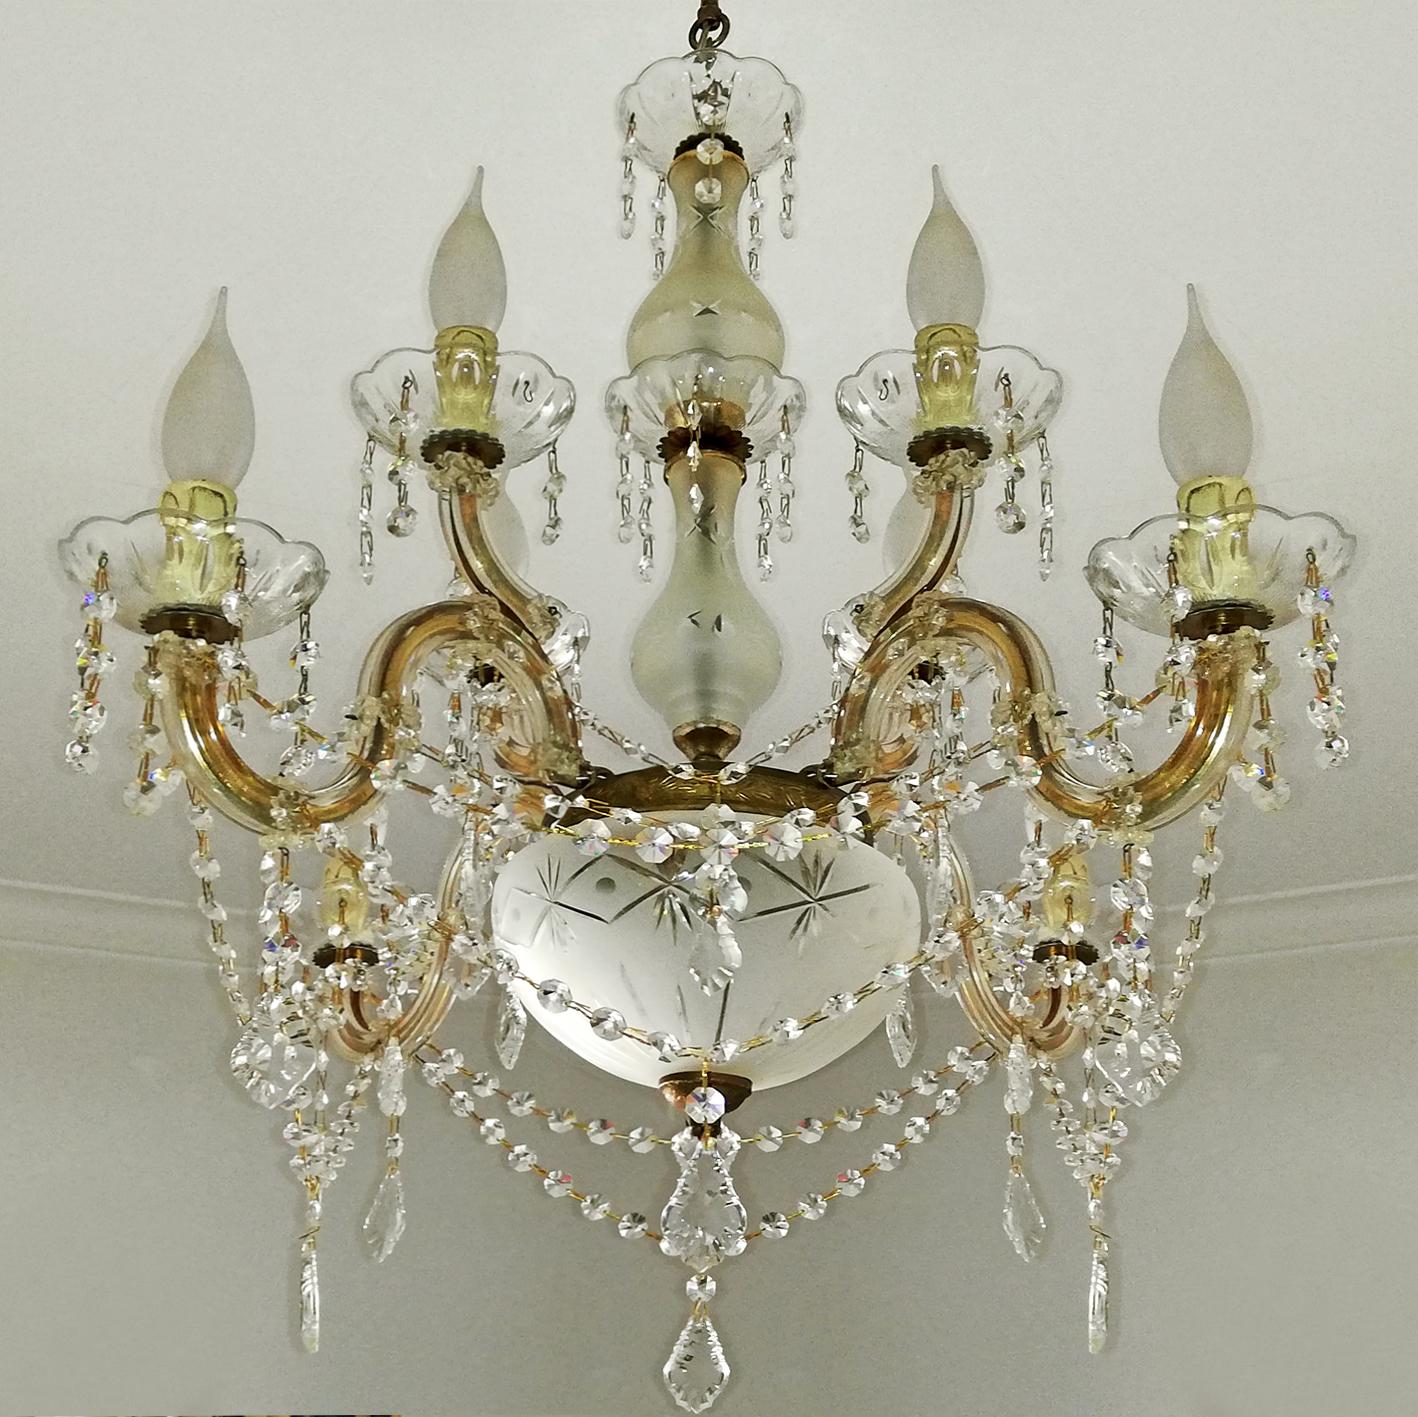 Marie Therese eight-light crystal chandelier with cut glass bowl, crystal drops and swags
Measures:
Diameter 26.7 in/ 68 cm
Height 30.7 in /78 cm
Weight 11 lb/5 Kg
Eight light bulbs E14/ good working condition
Assembly required. Bulbs not